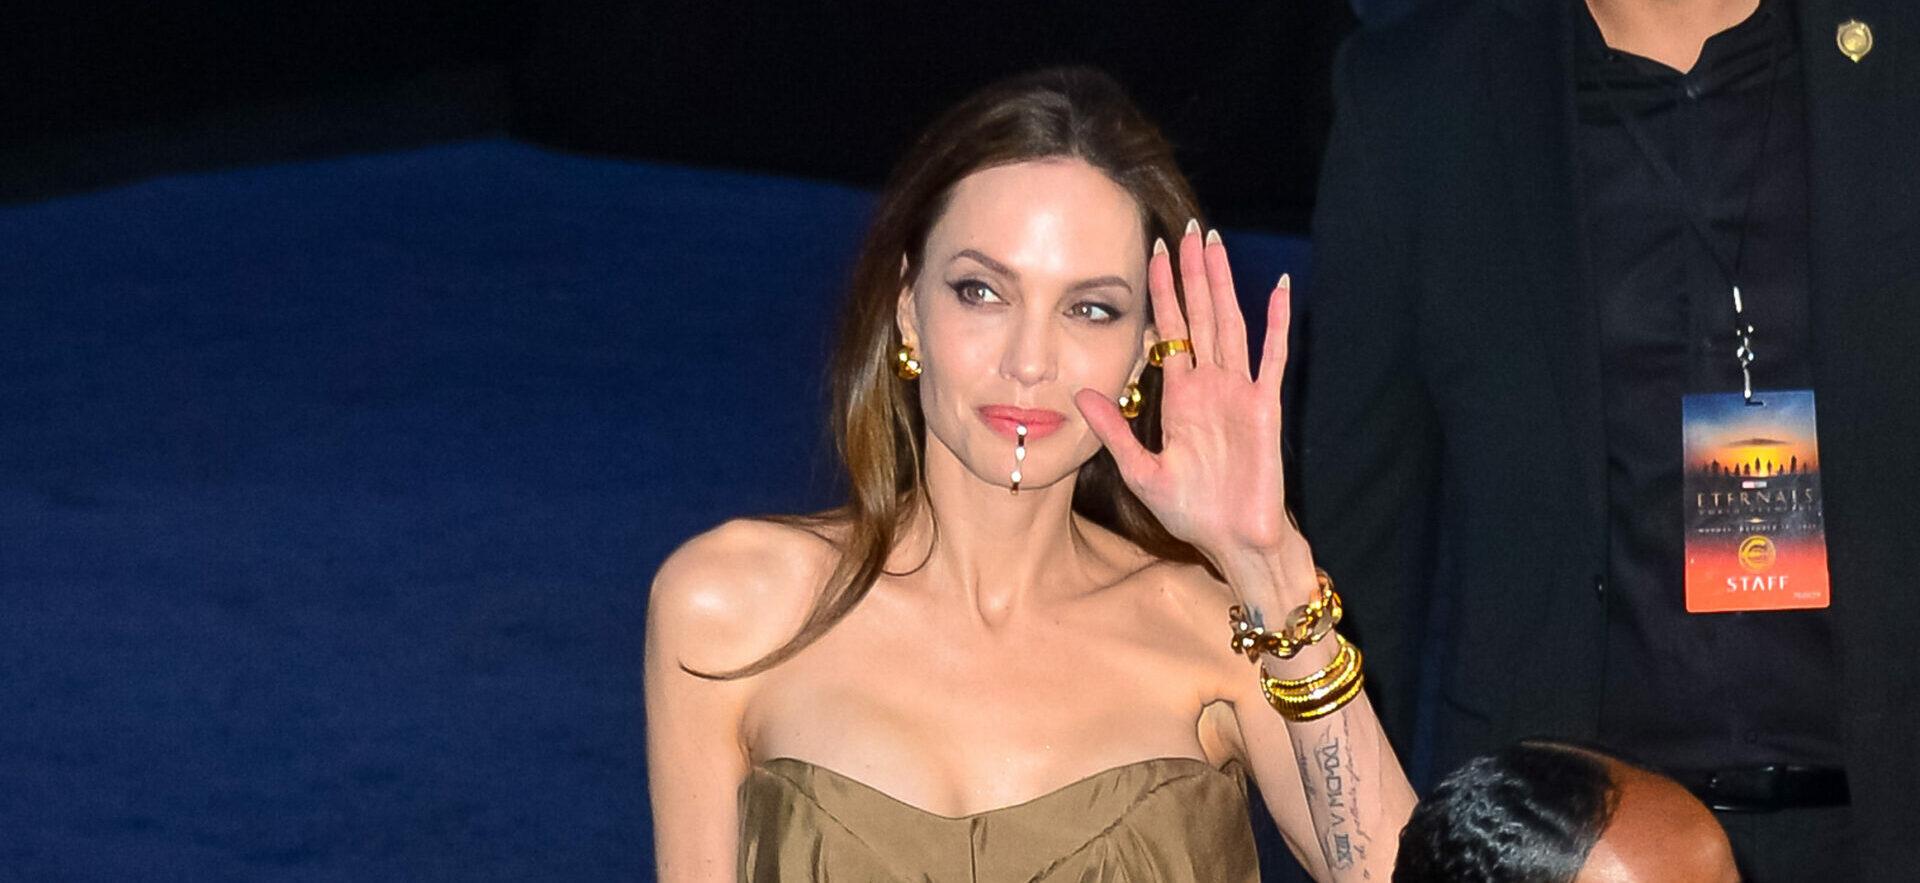 Angelina Jolie Opens Up About Her Unique Children And How She Relates With Them